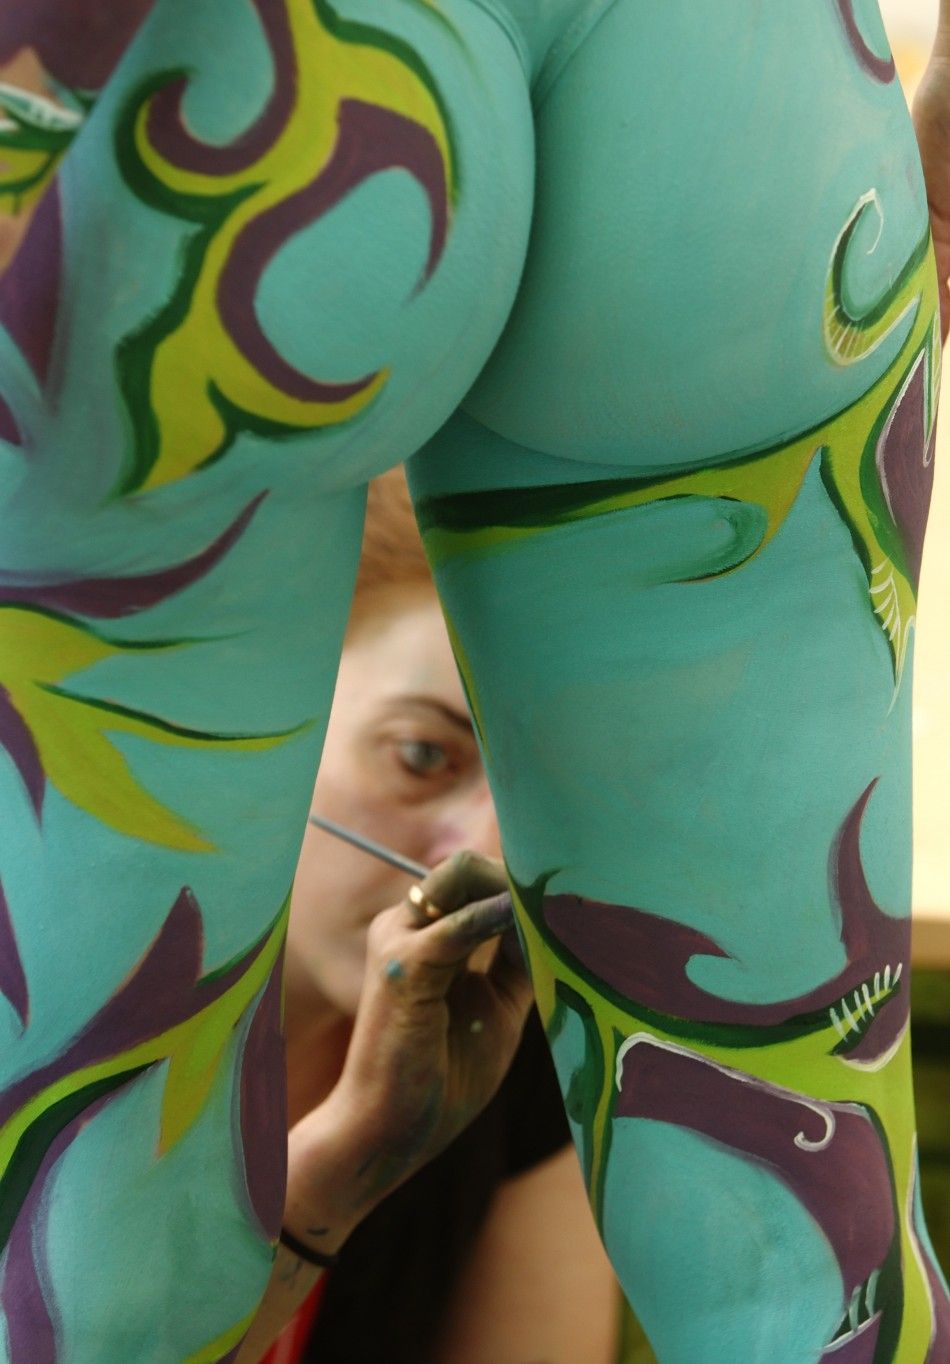 An artist paints a model during the annual World Bodypainting Festival in Poertschach